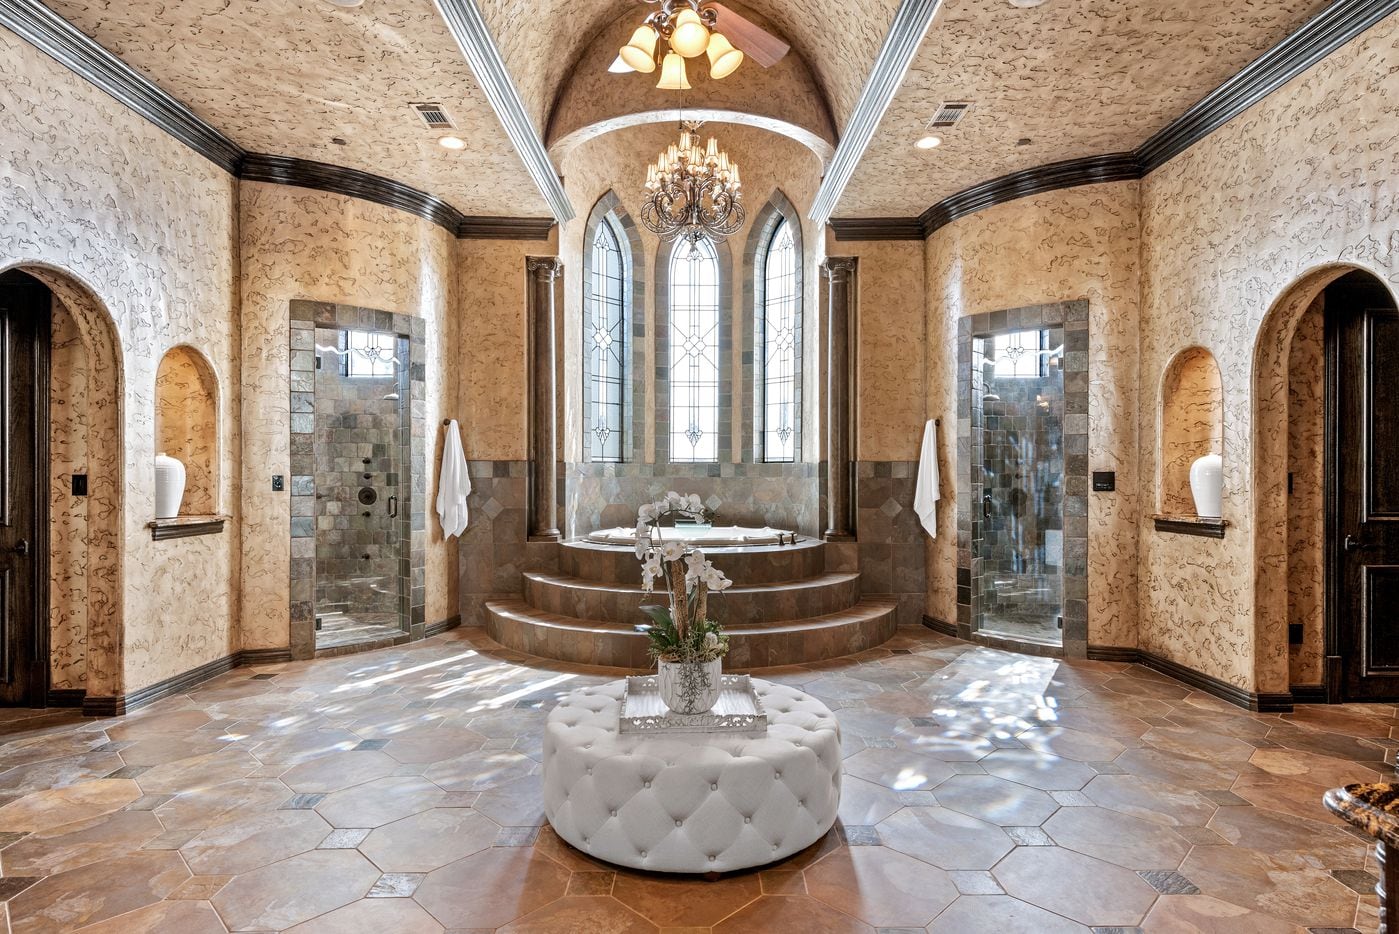 This Southlake home looks like a castle with turrets, spires and arched windows